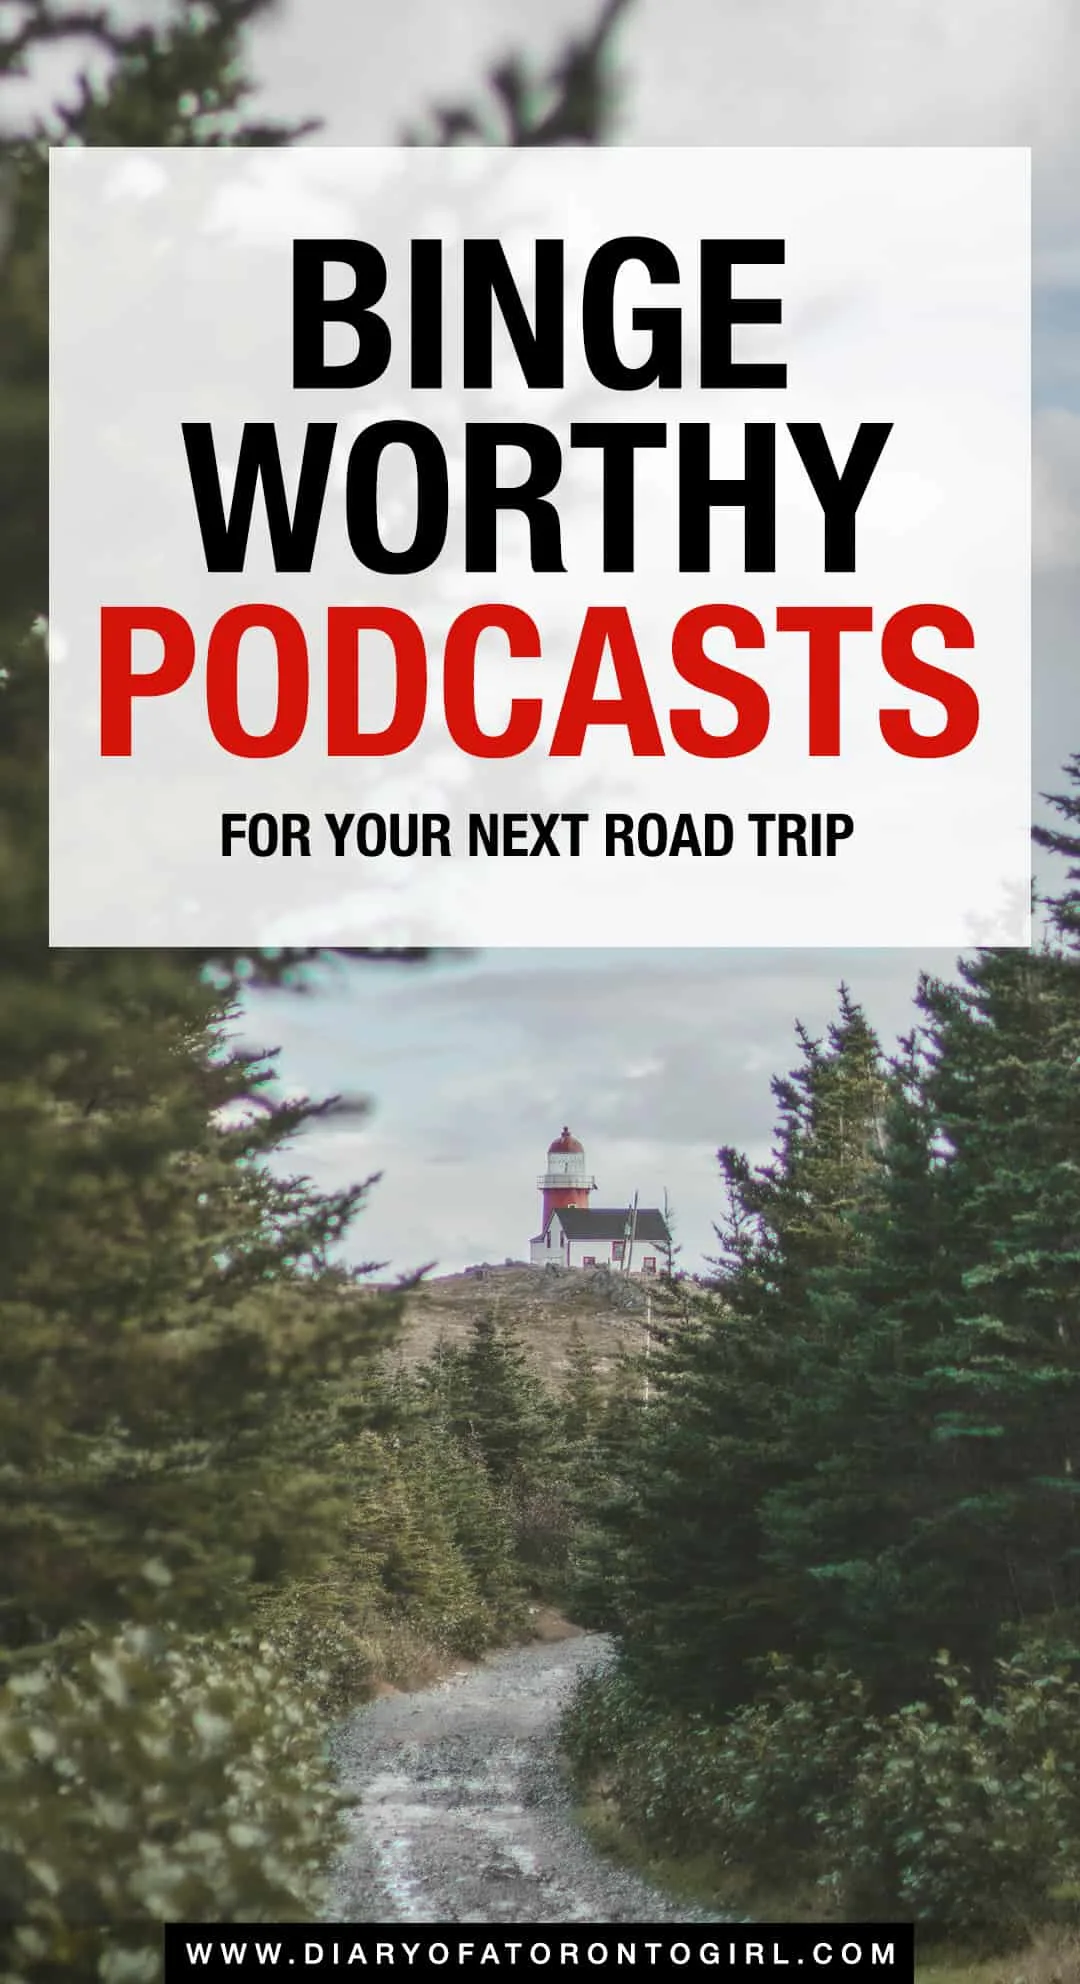 Some of the best podcasts to listen to during your next road trip! Whether you're driving for 2 short hours or 7 long hours, here are binge-worthy podcasts worth listening to make your drive more enjoyable.